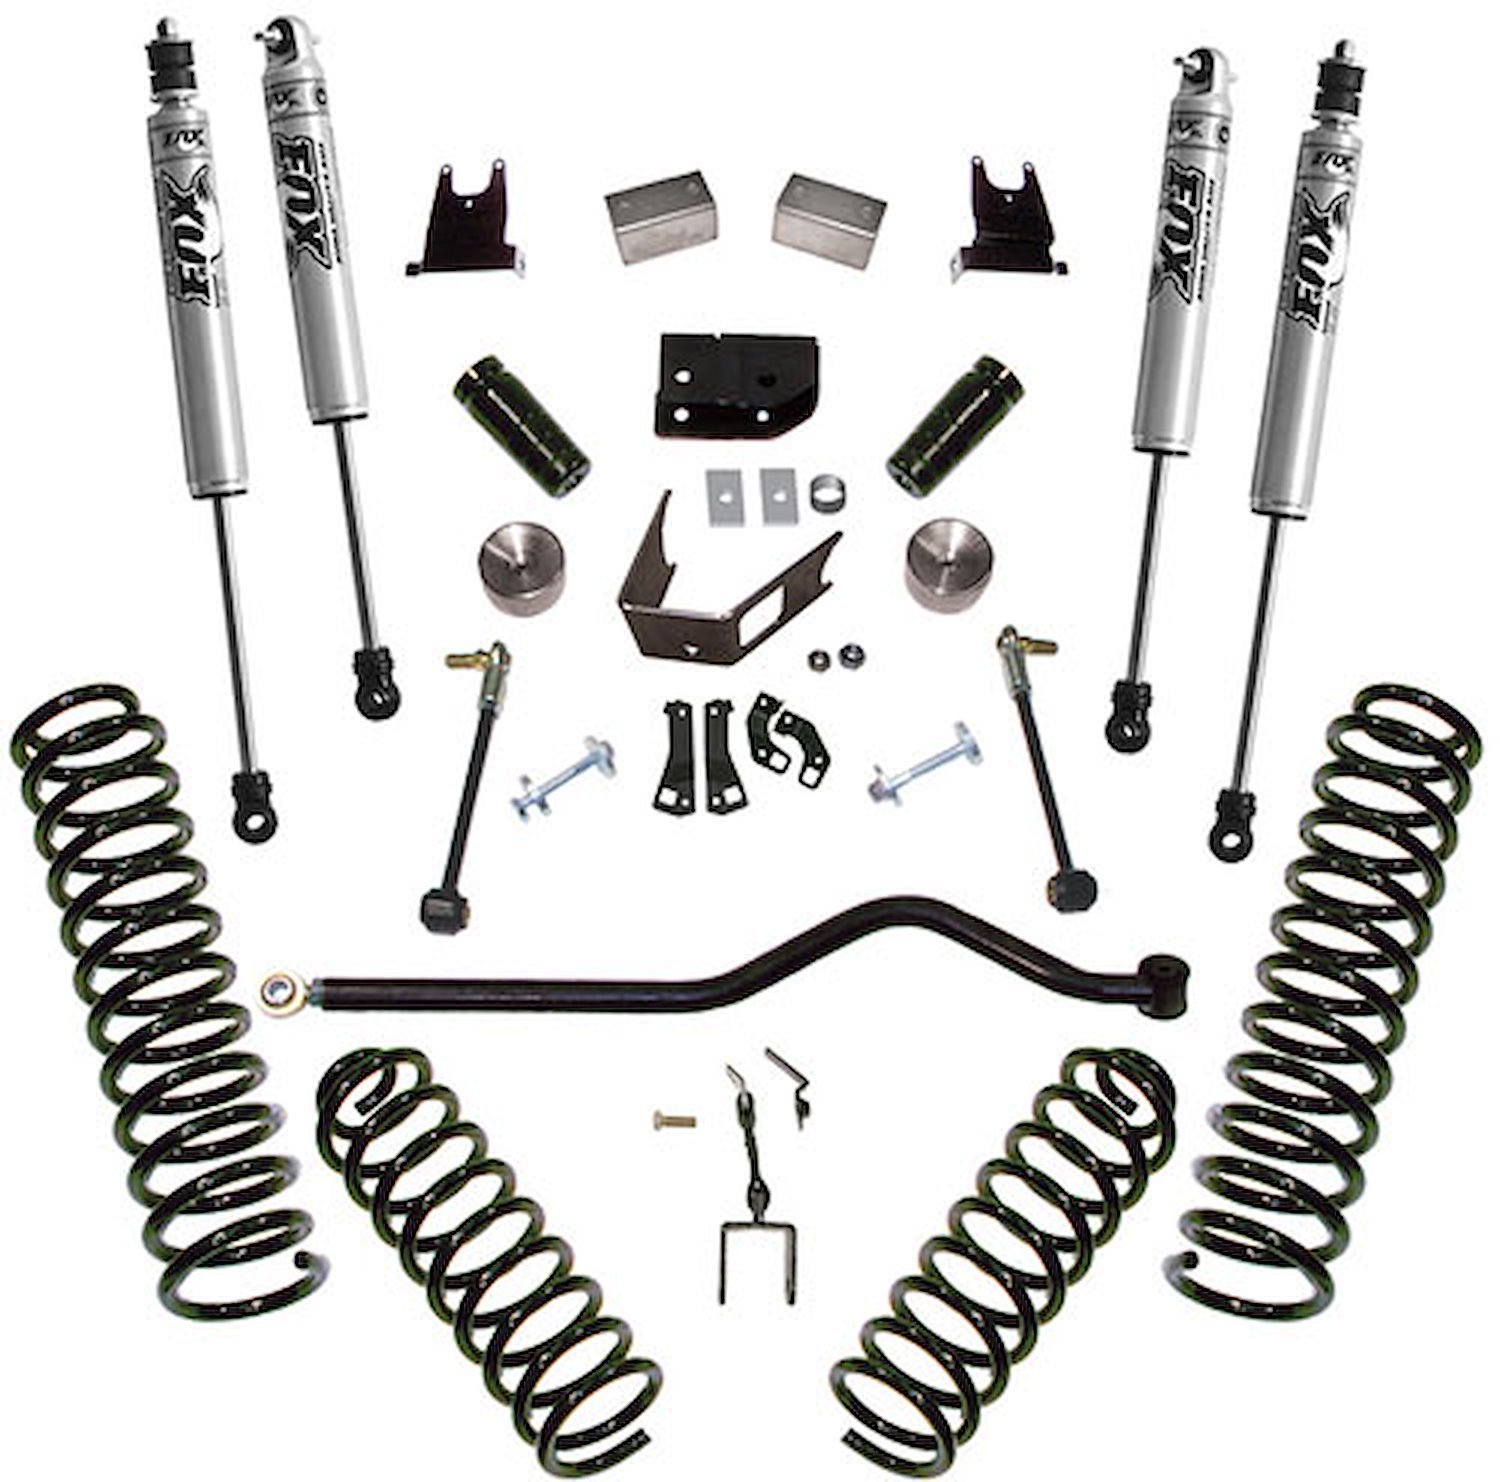 K927F Front and Rear Suspension Lift Kit, Lift Amount: 4 in. Front/4 in. Rear